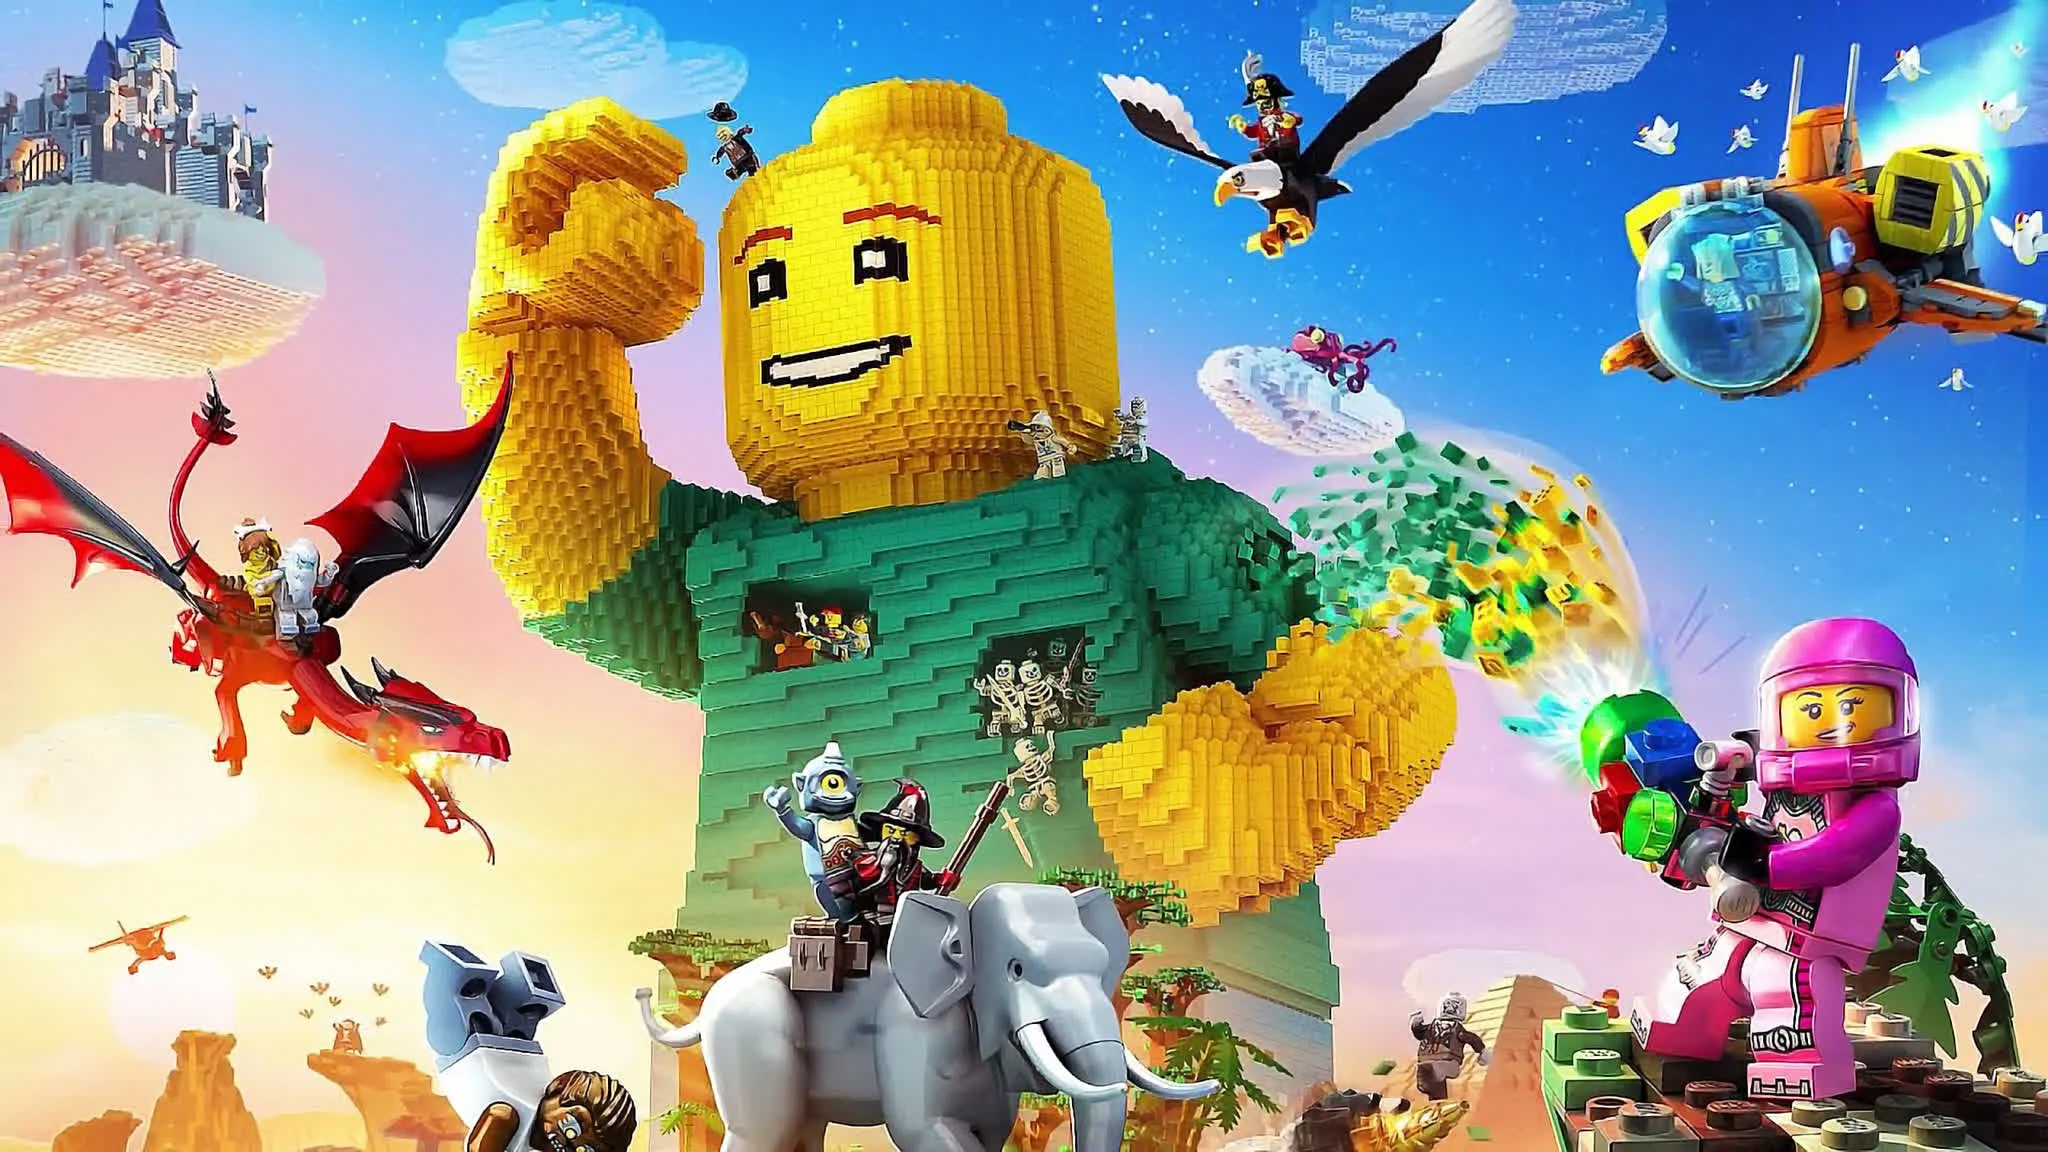 LEGO and Epic Games will create a children's metaverse